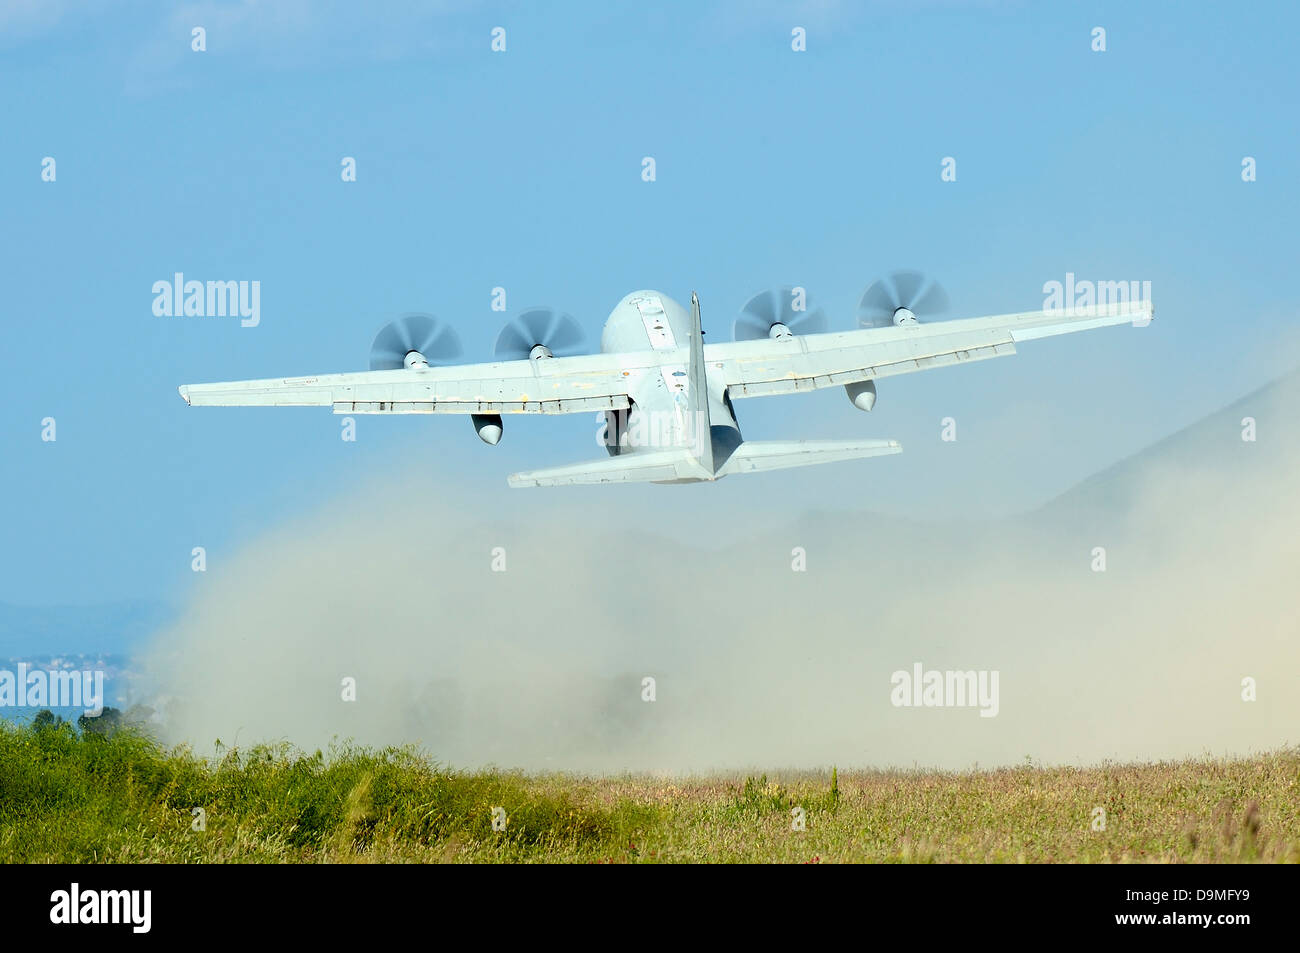 May 9, 2013 - A C-130 Hercules of the Italian Air Force taking off from an unpaved landing strip, Grazzanise, Italy. Stock Photo